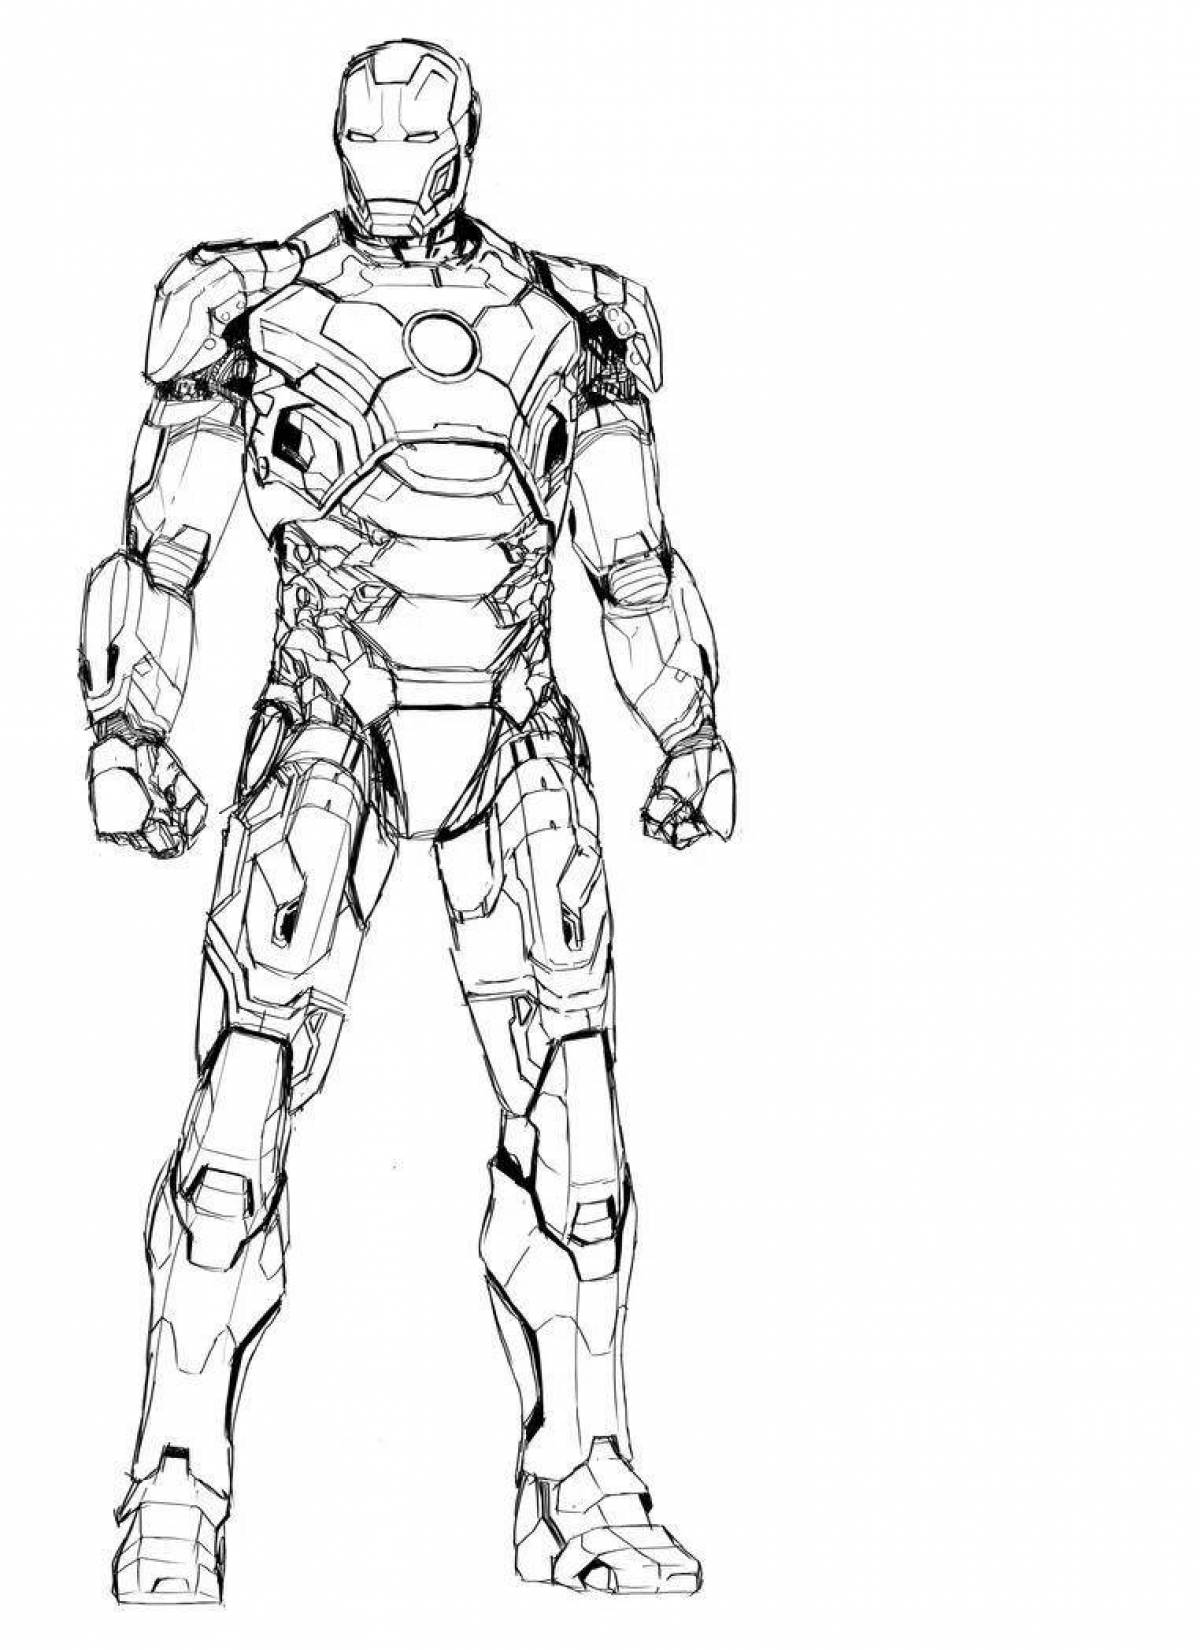 Iron man dazzling coloring book 50 stamps